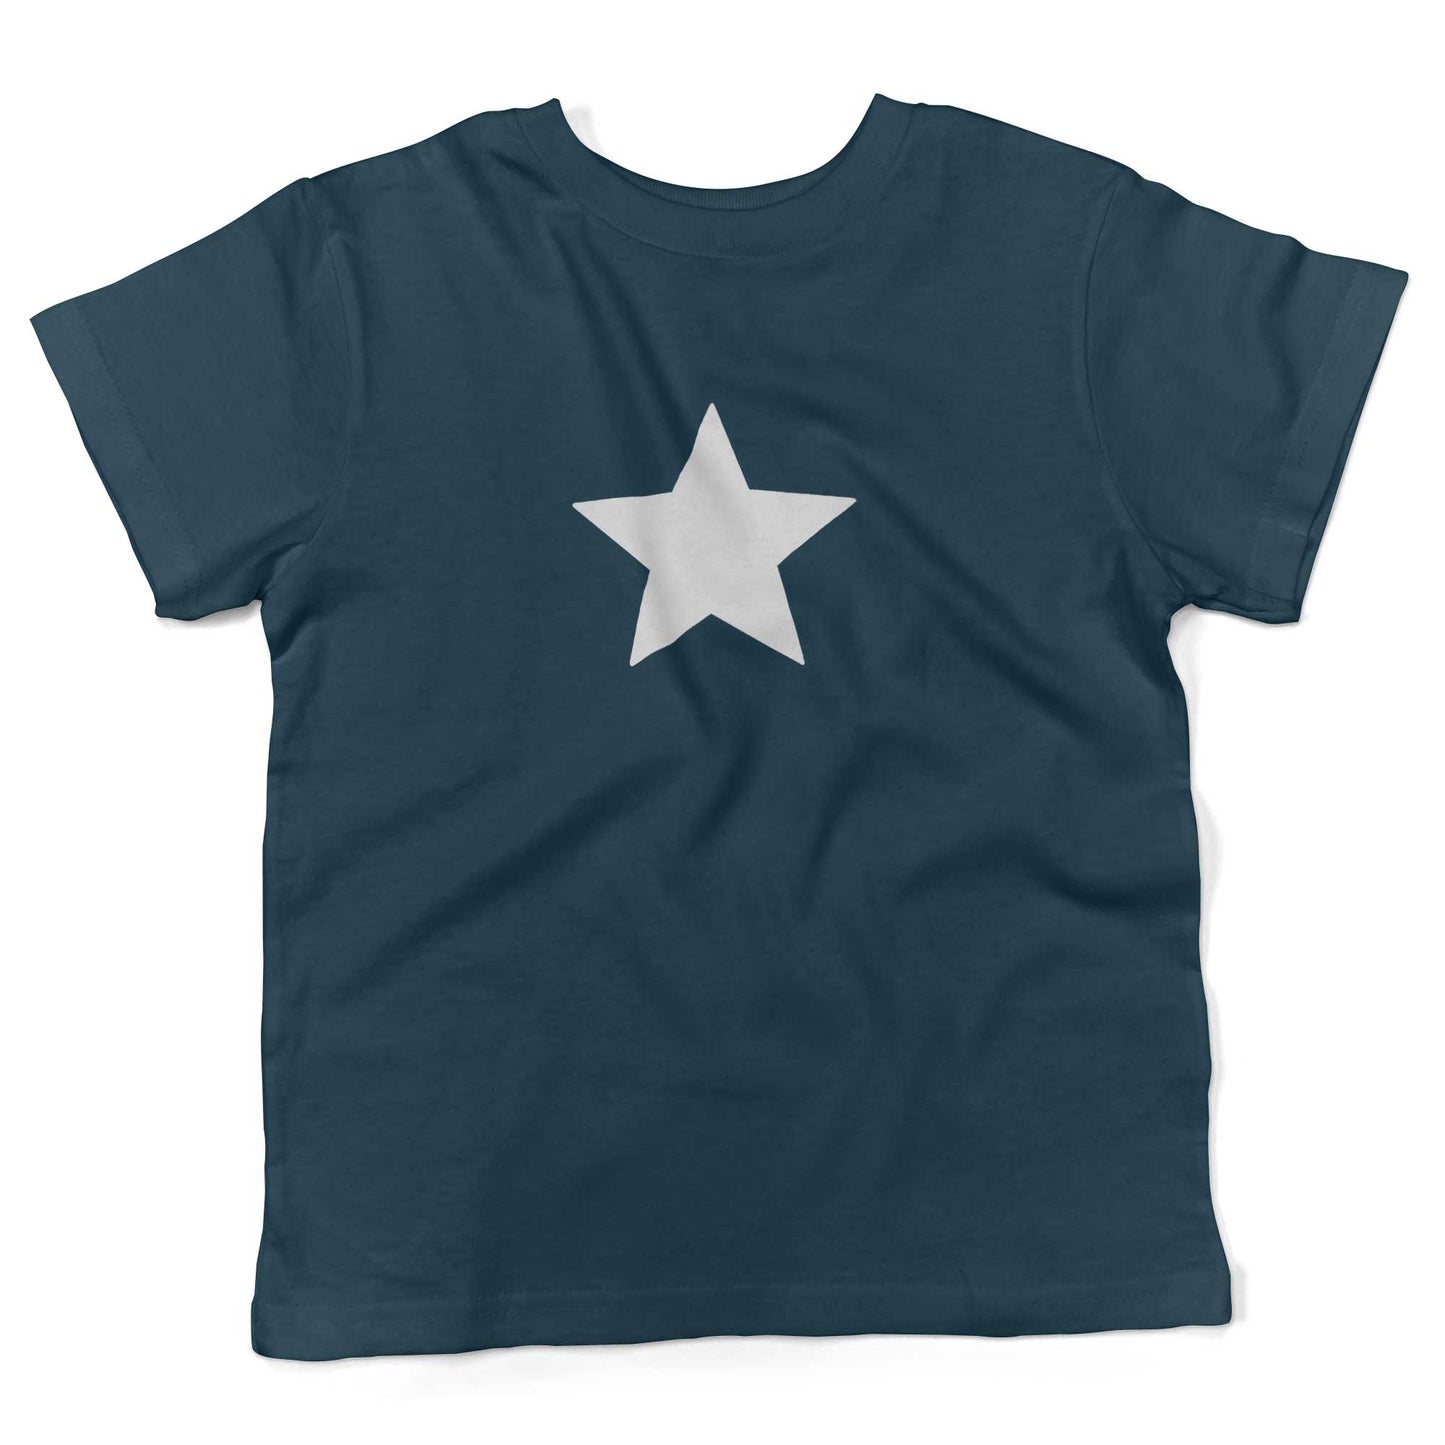 Five-Point Star Toddler Shirt-Organic Pacific Blue-White Star